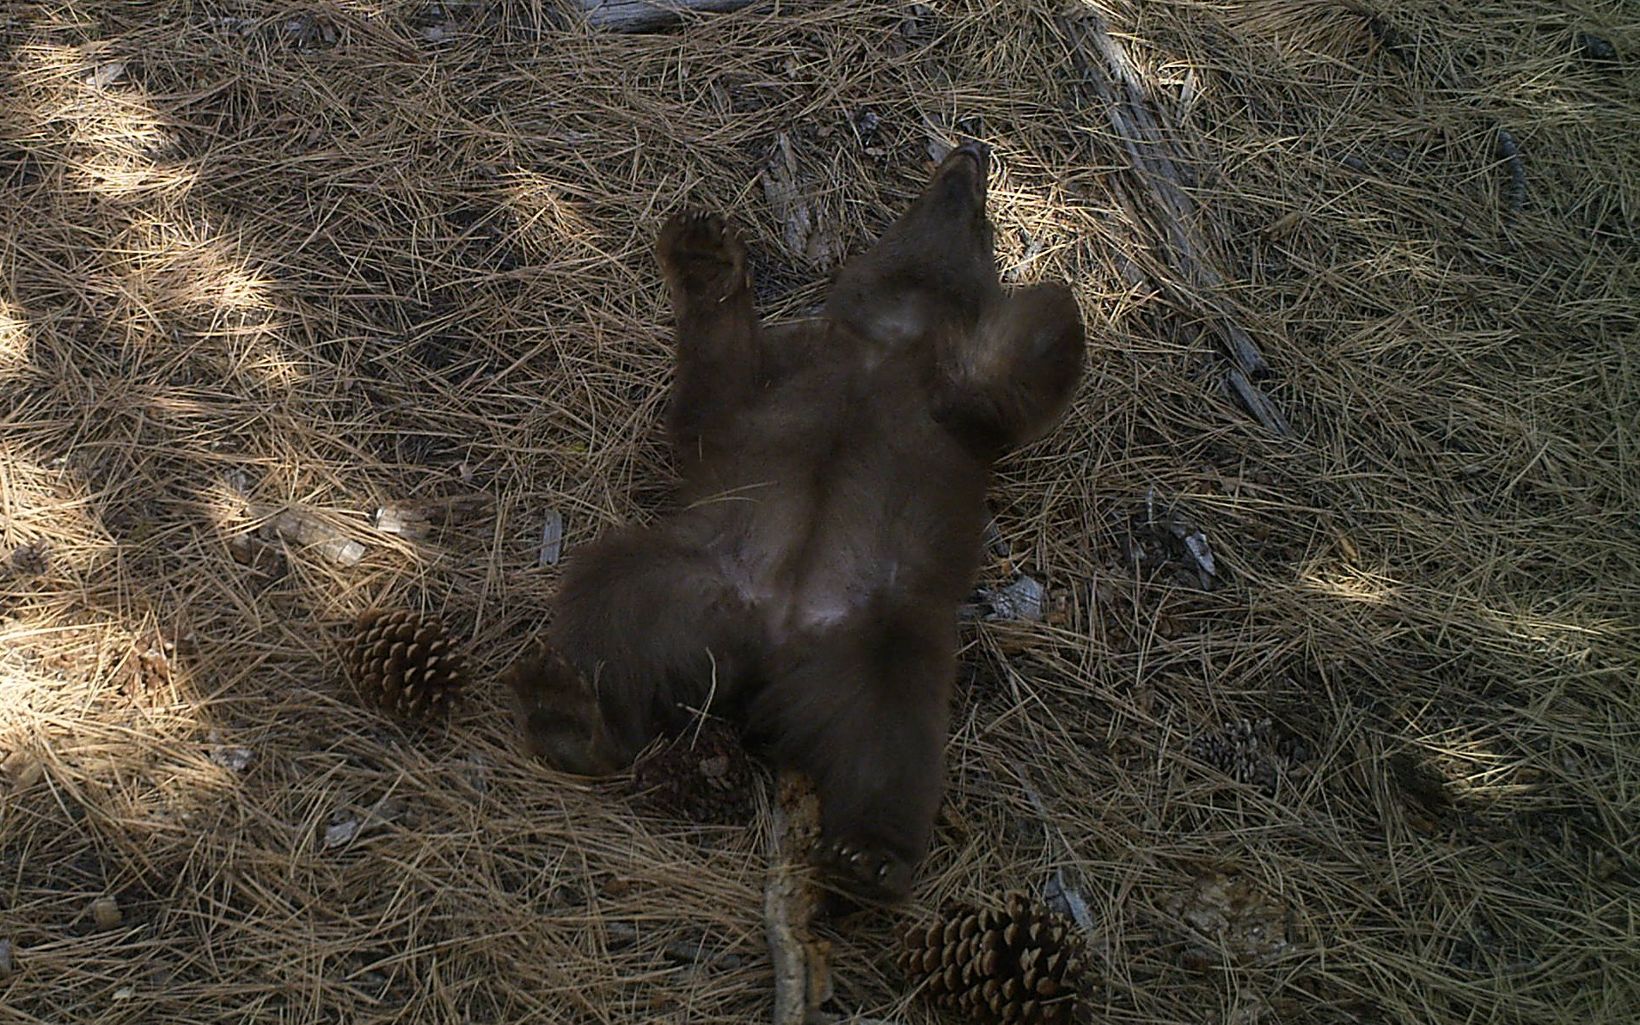 Rolling Bear Cub Footage from the Carpenter Valley Wildlife Cameras © The Nature Conservancy